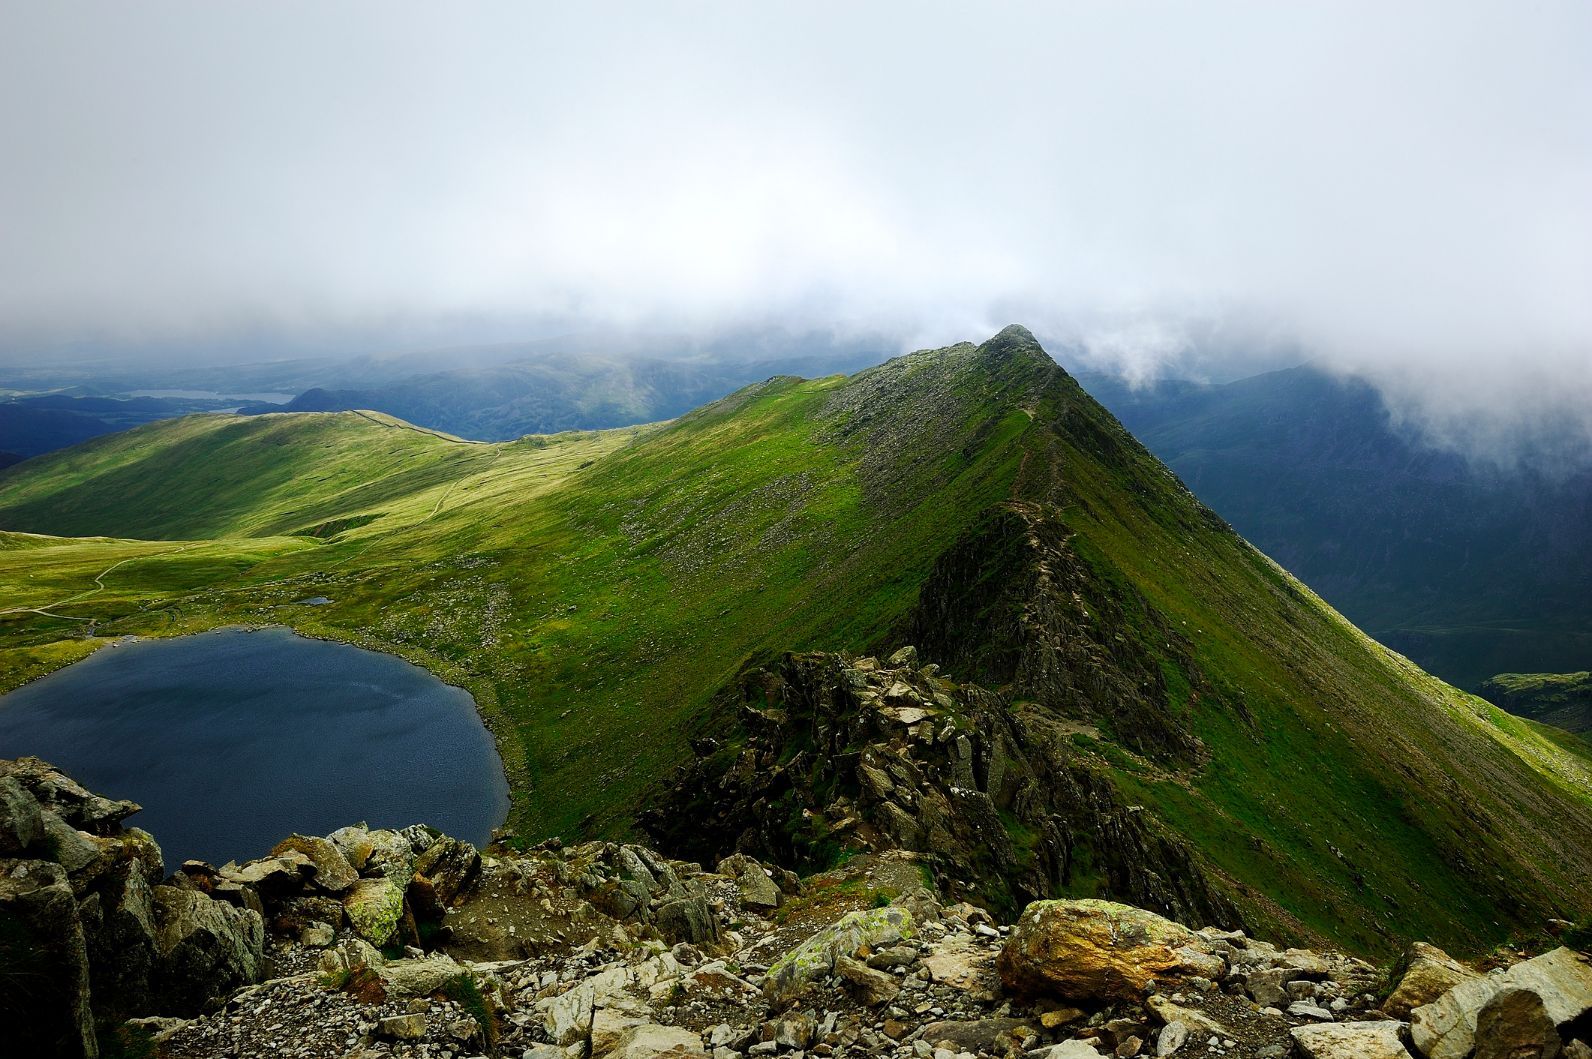 The Striding Edge ridgeline which leads up to Helvellyn, in the Lake District.